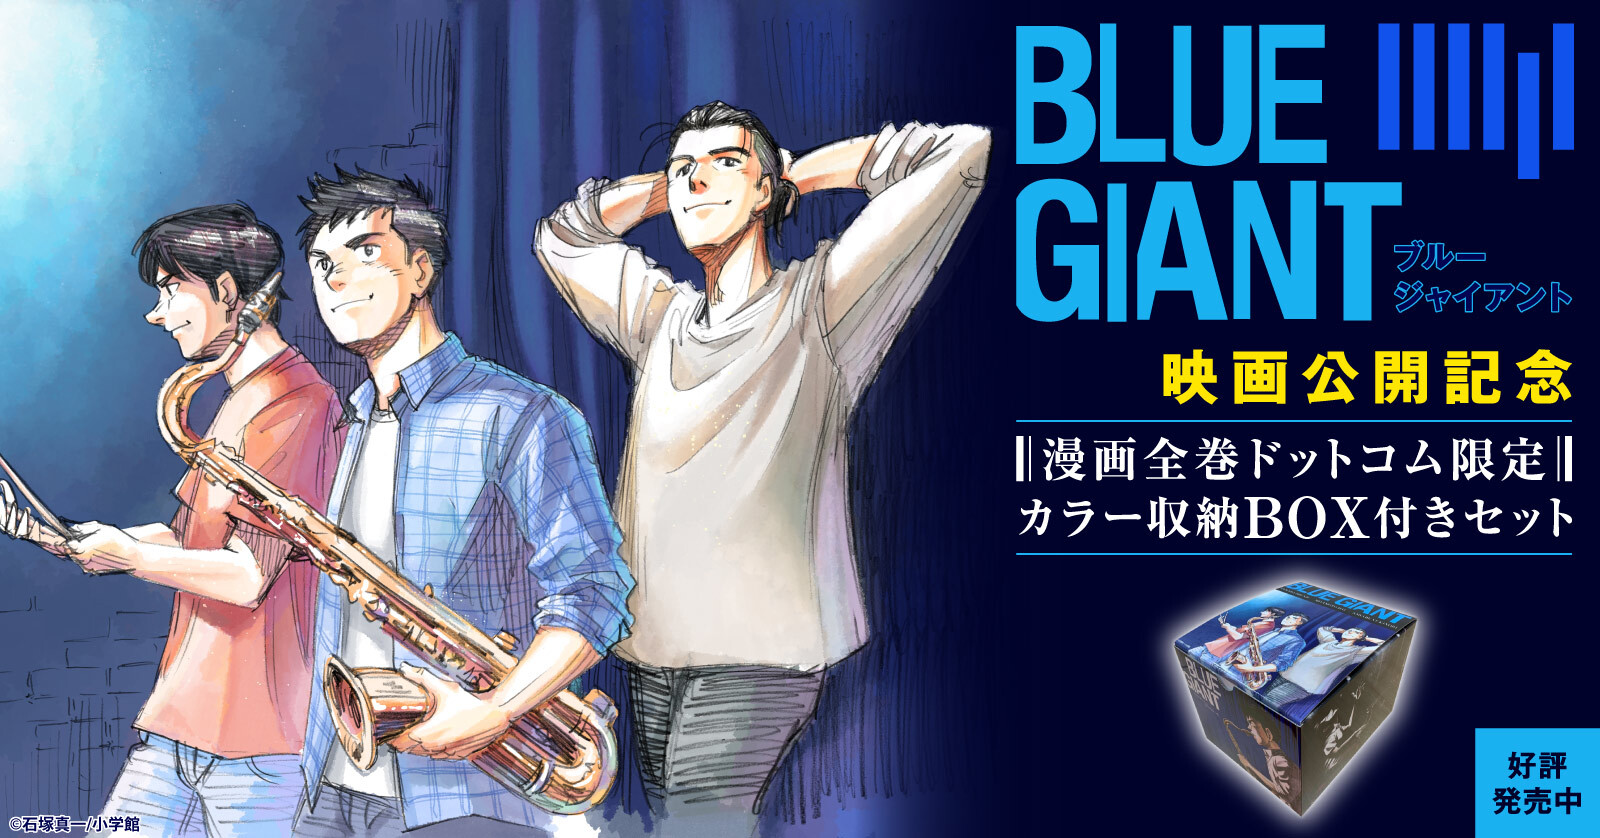 Depicting The Spirit of Jazz Interview with BLUE GIANT Story Director  NUMBER 8 on His First Novel Piano Man and The Background of Its Creation   TOKION